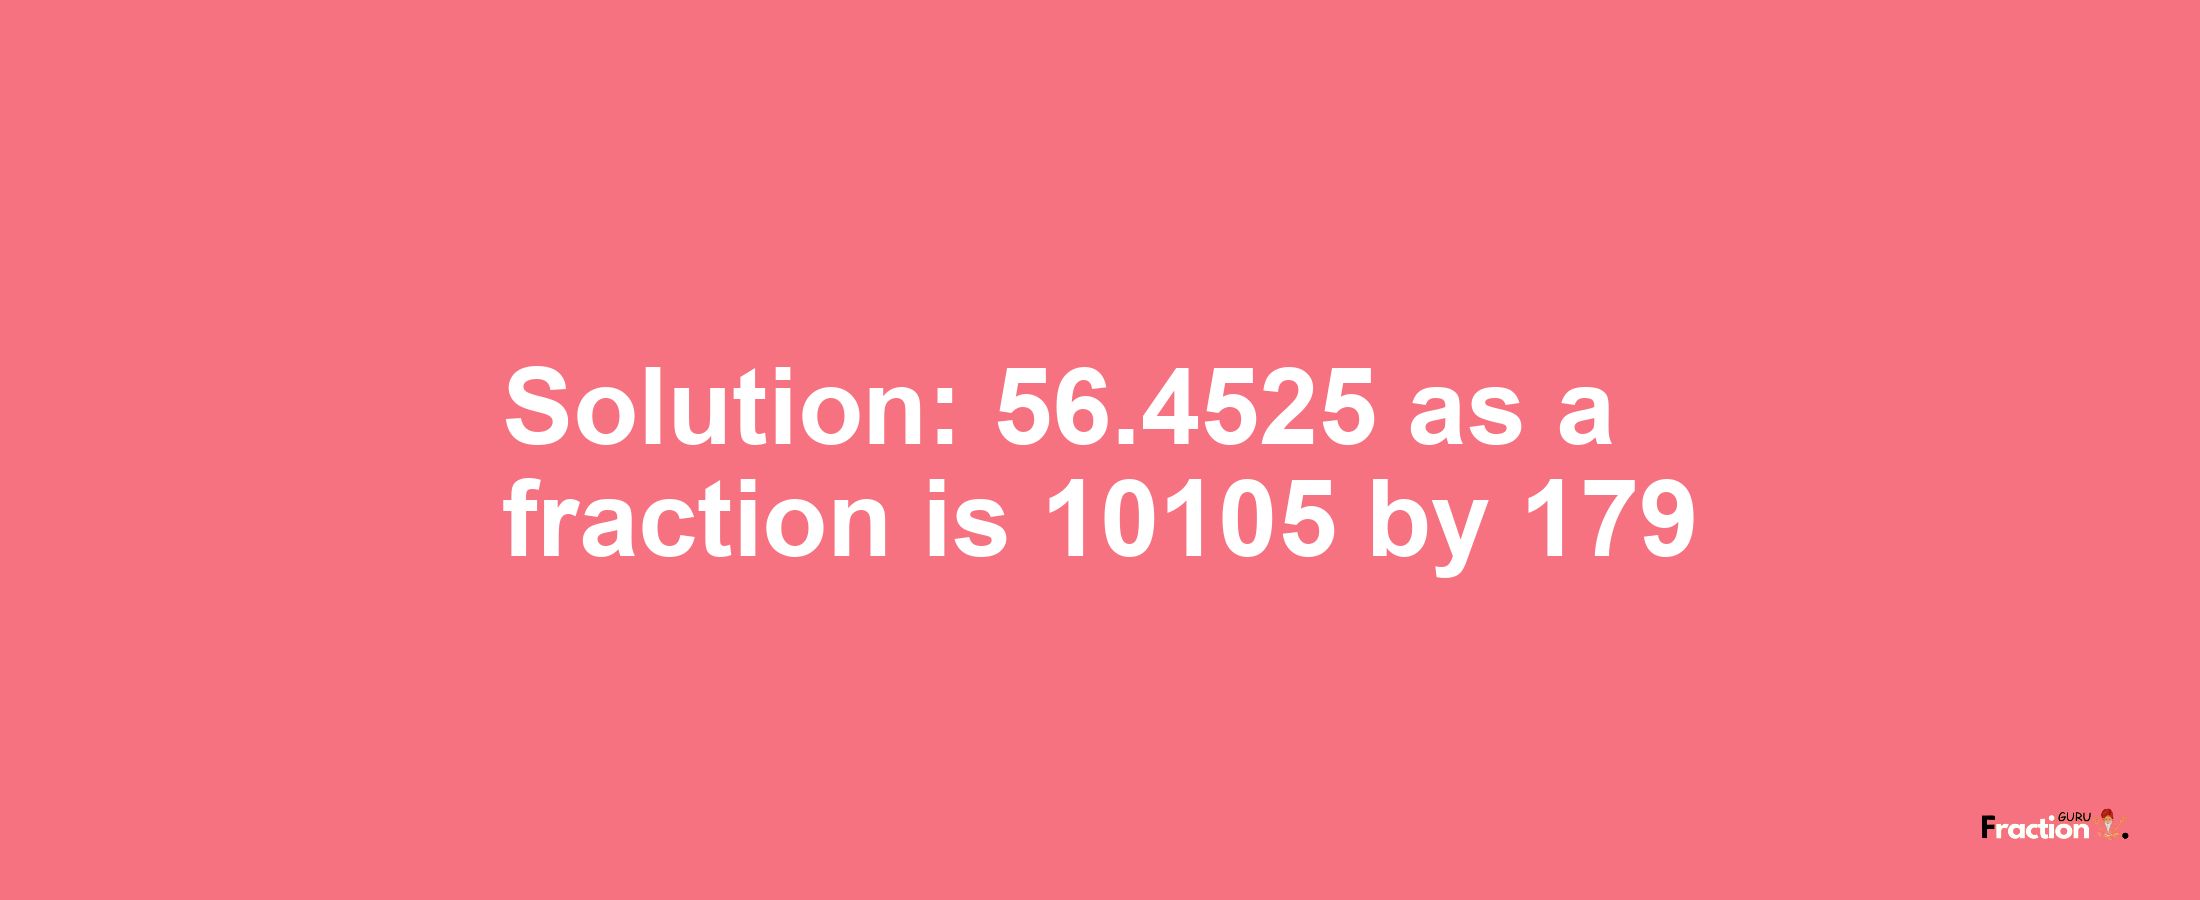 Solution:56.4525 as a fraction is 10105/179